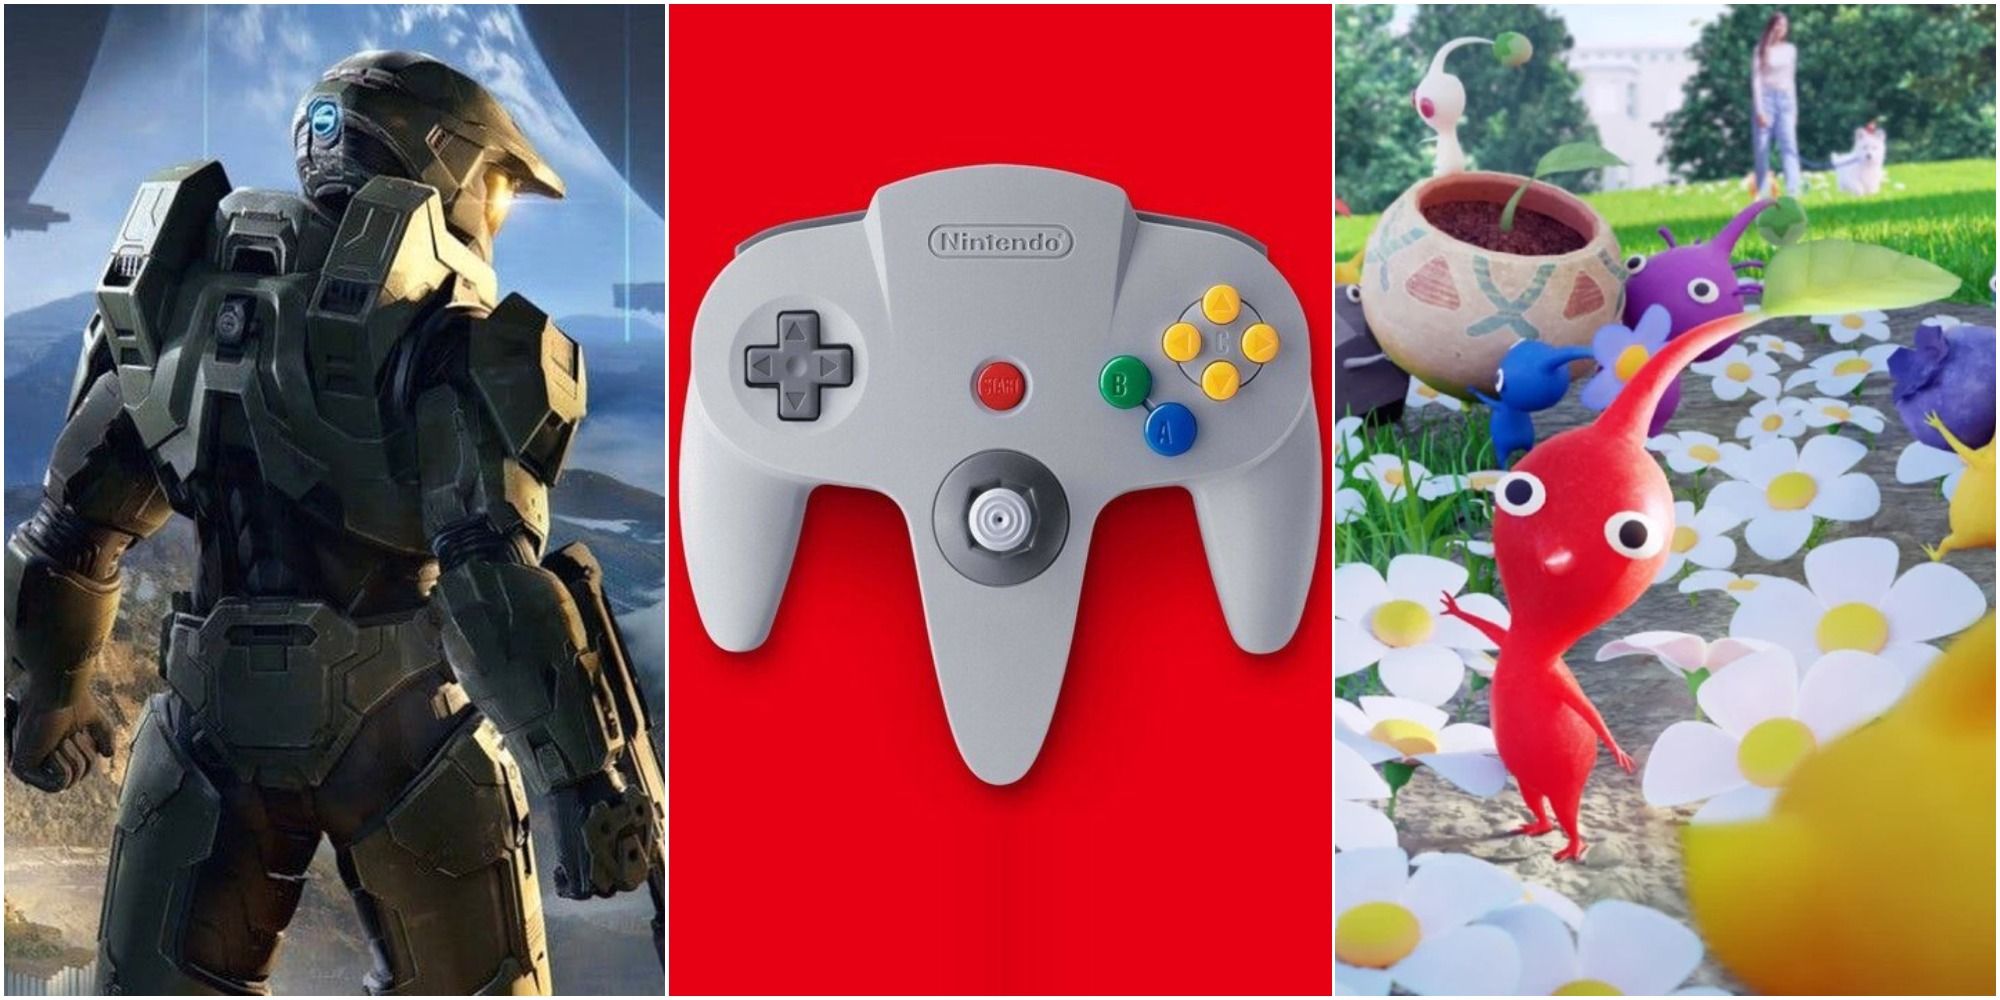 master chief n64 controller pikmin